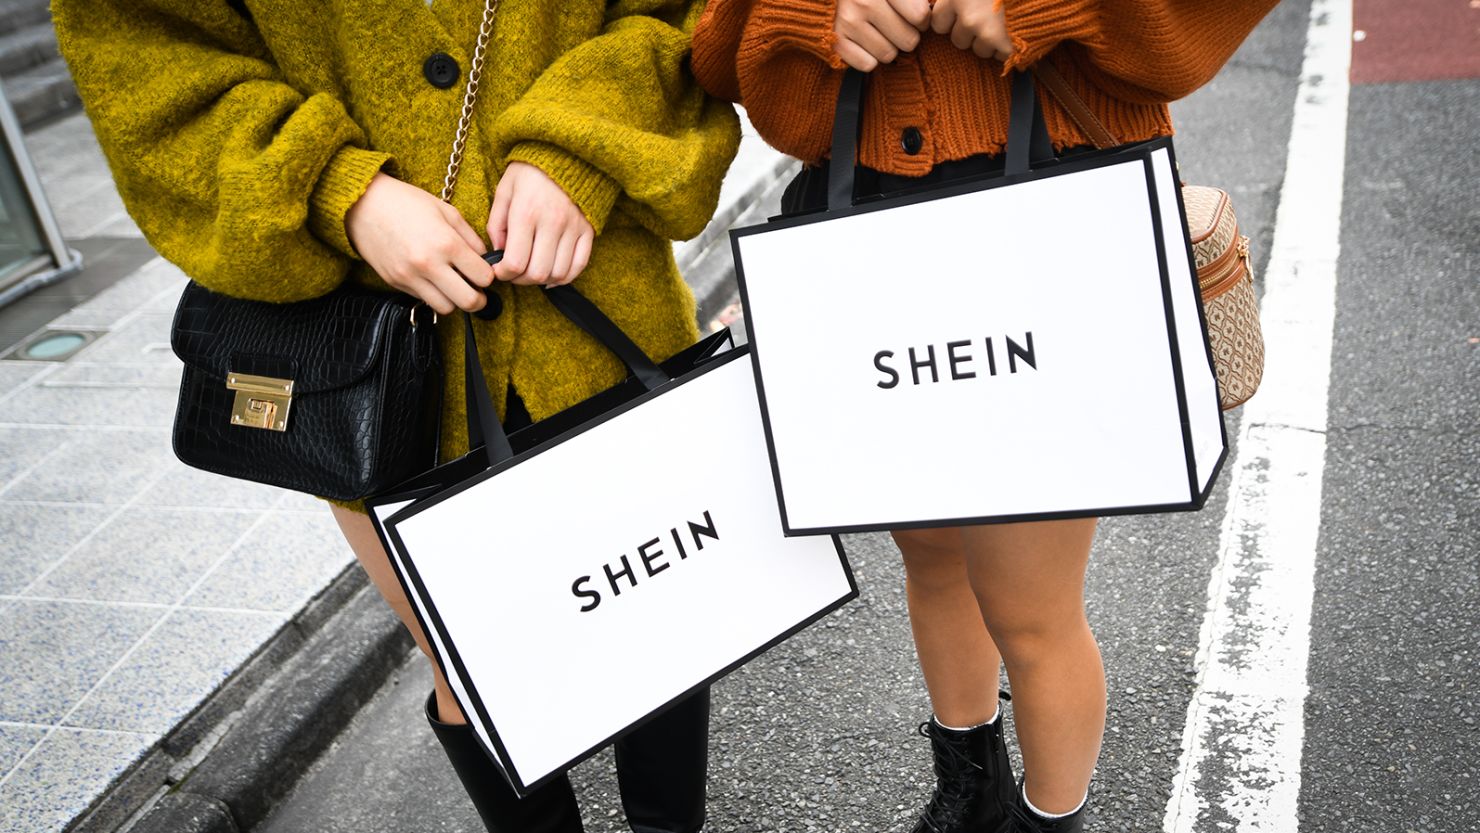 Shein tells suppliers to end long working days at factories by end